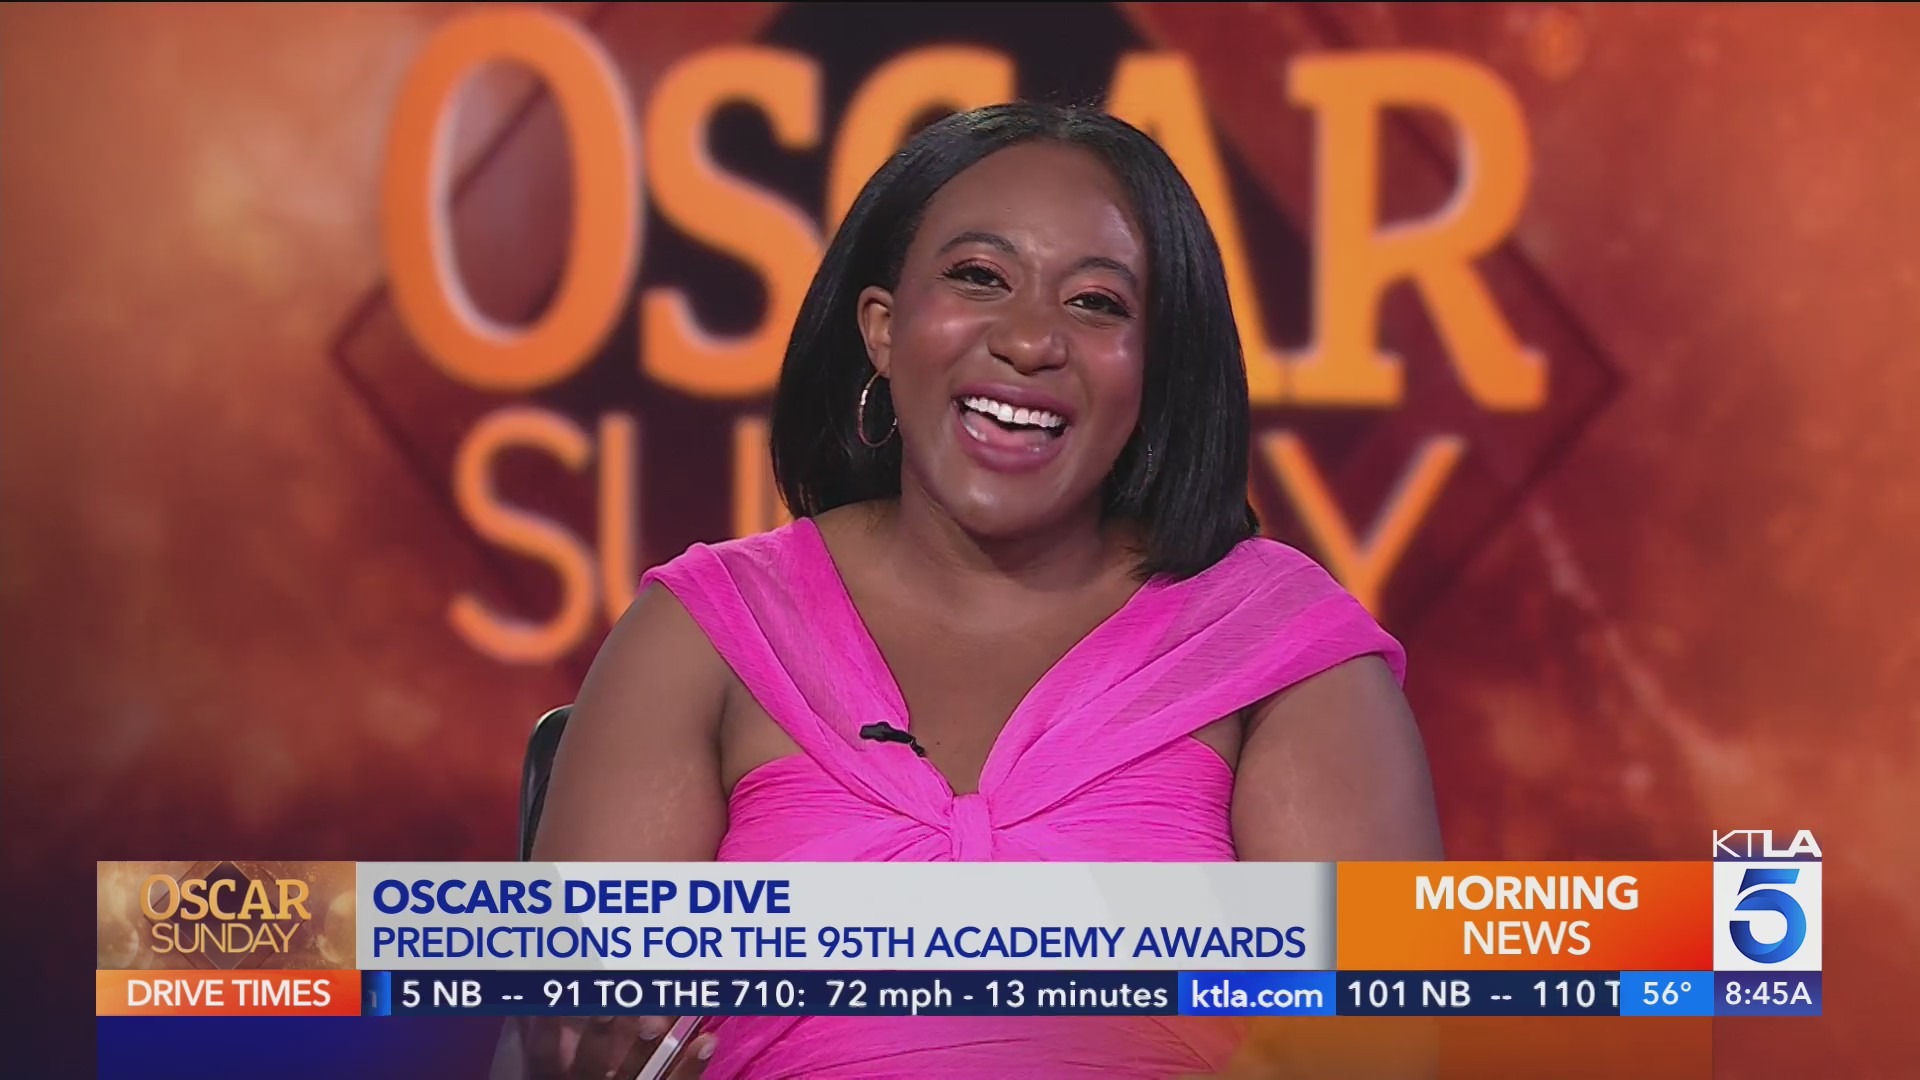 Variety's Angelique Jackson offers Oscars deep dive